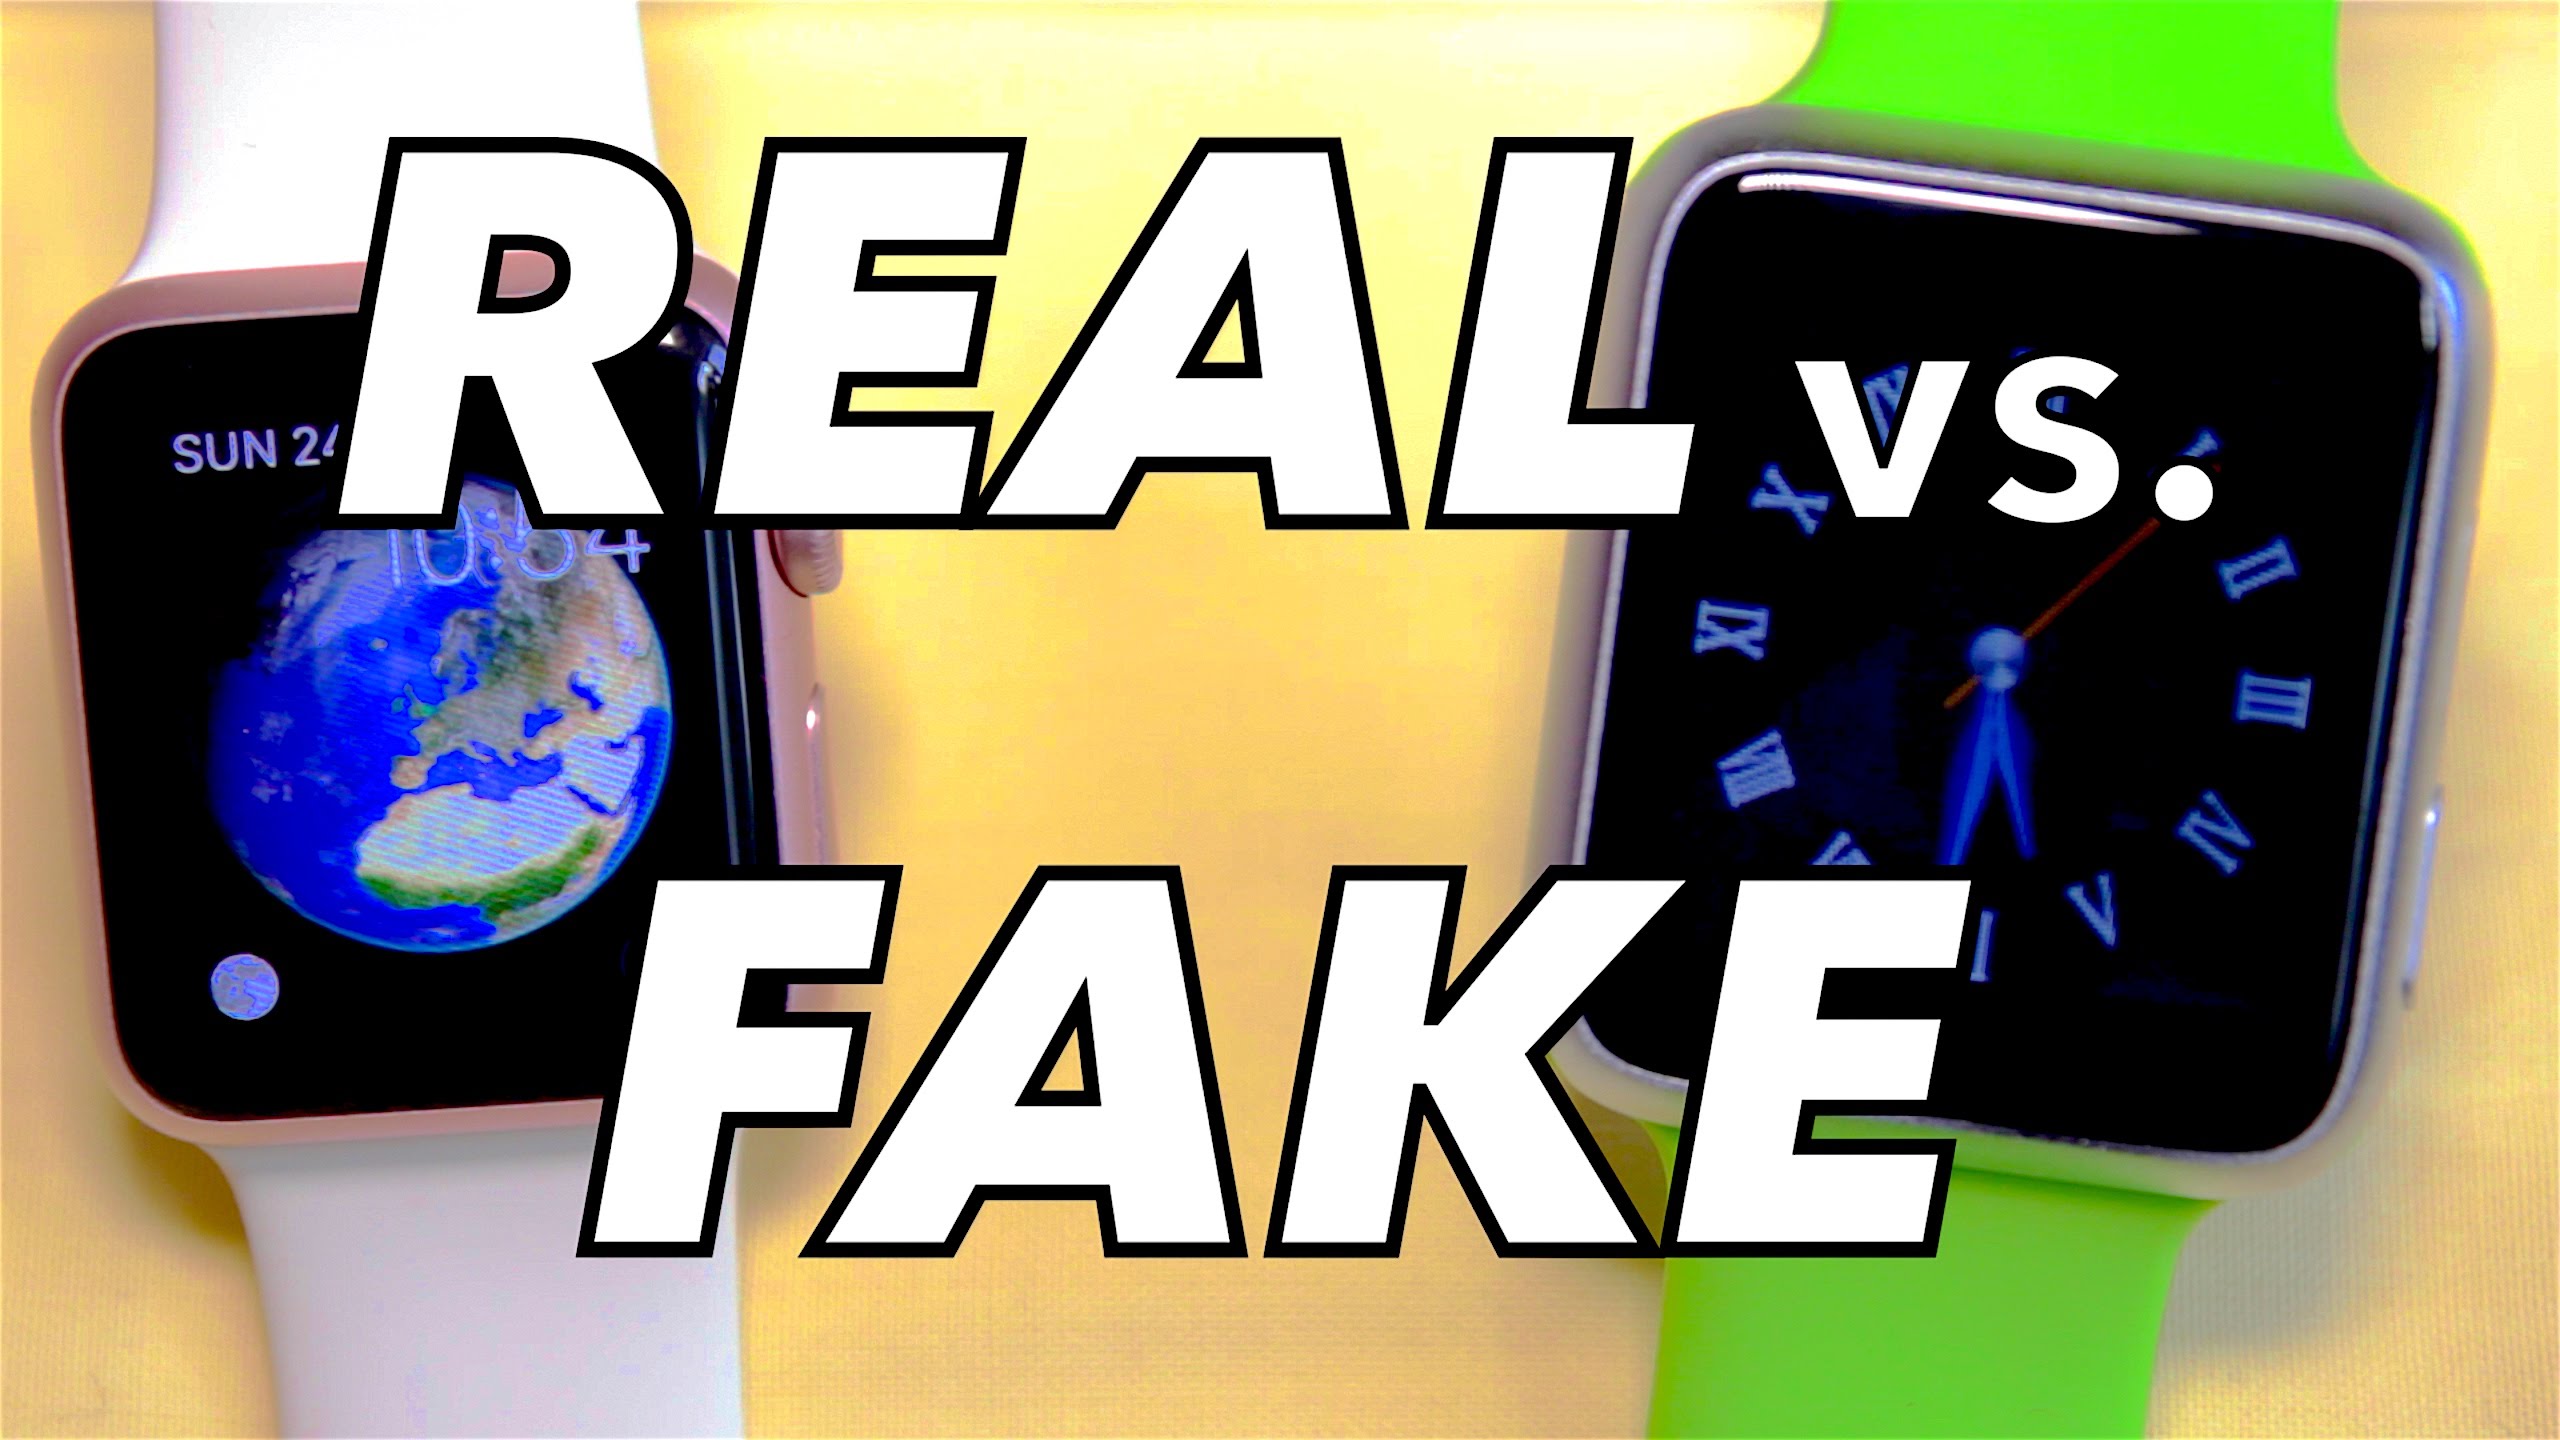 UNBOXING & REVIEW REAL APPLE WATCH SPORT VS CHINESE FAKE – 3000 SUBSCRIBER SPECIAL!